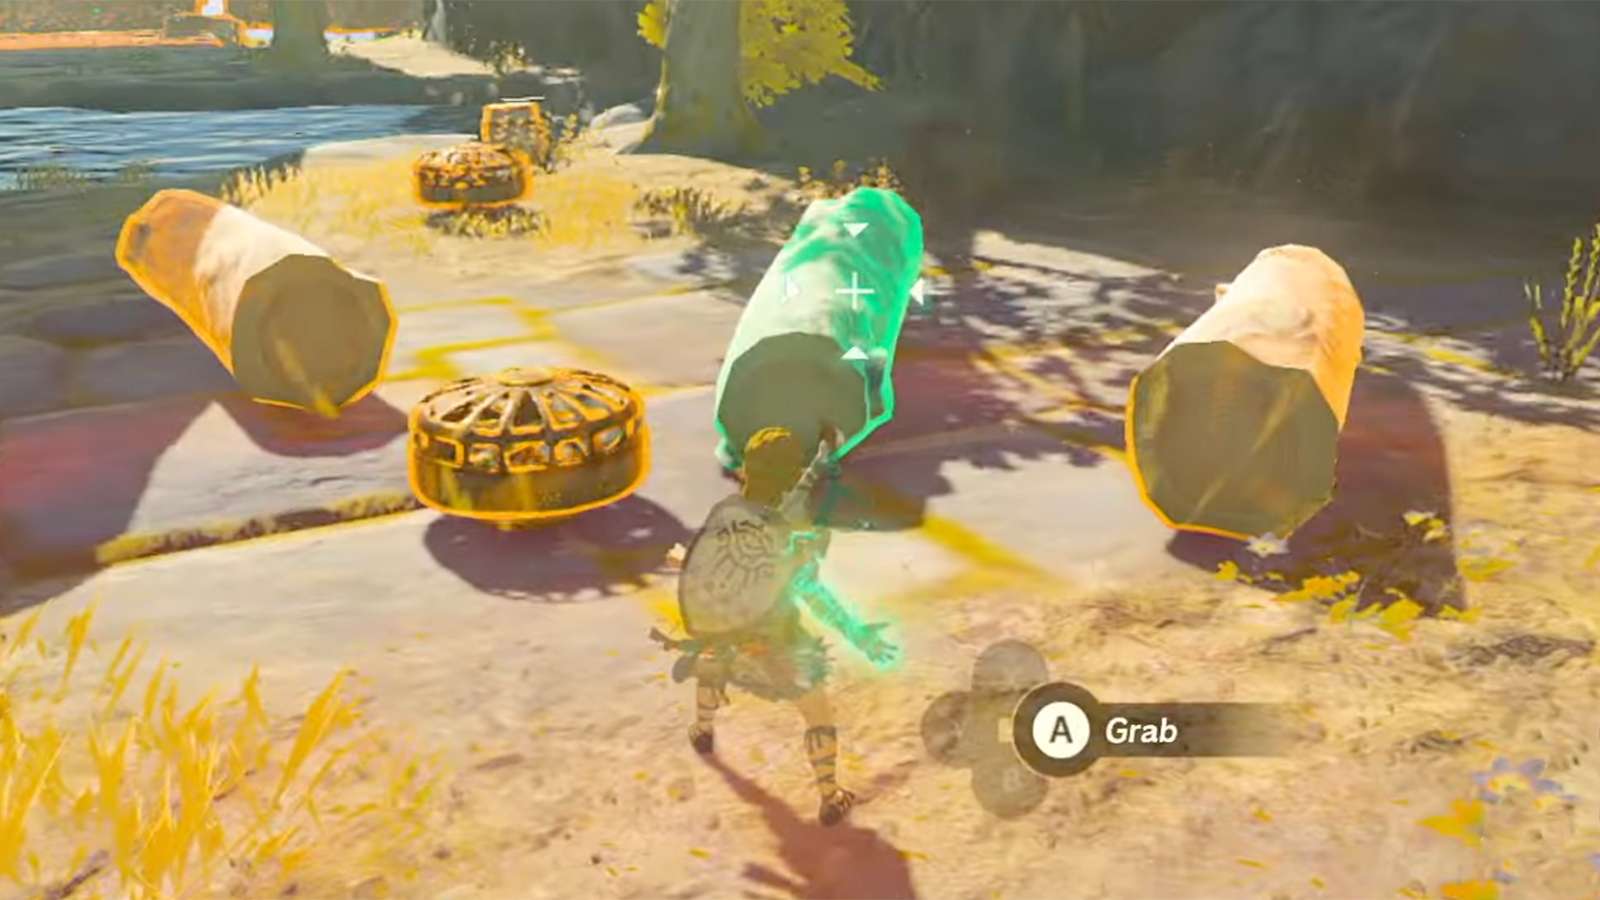 Link using the Ultrahand ability in Zelda Tears of the Kingdom